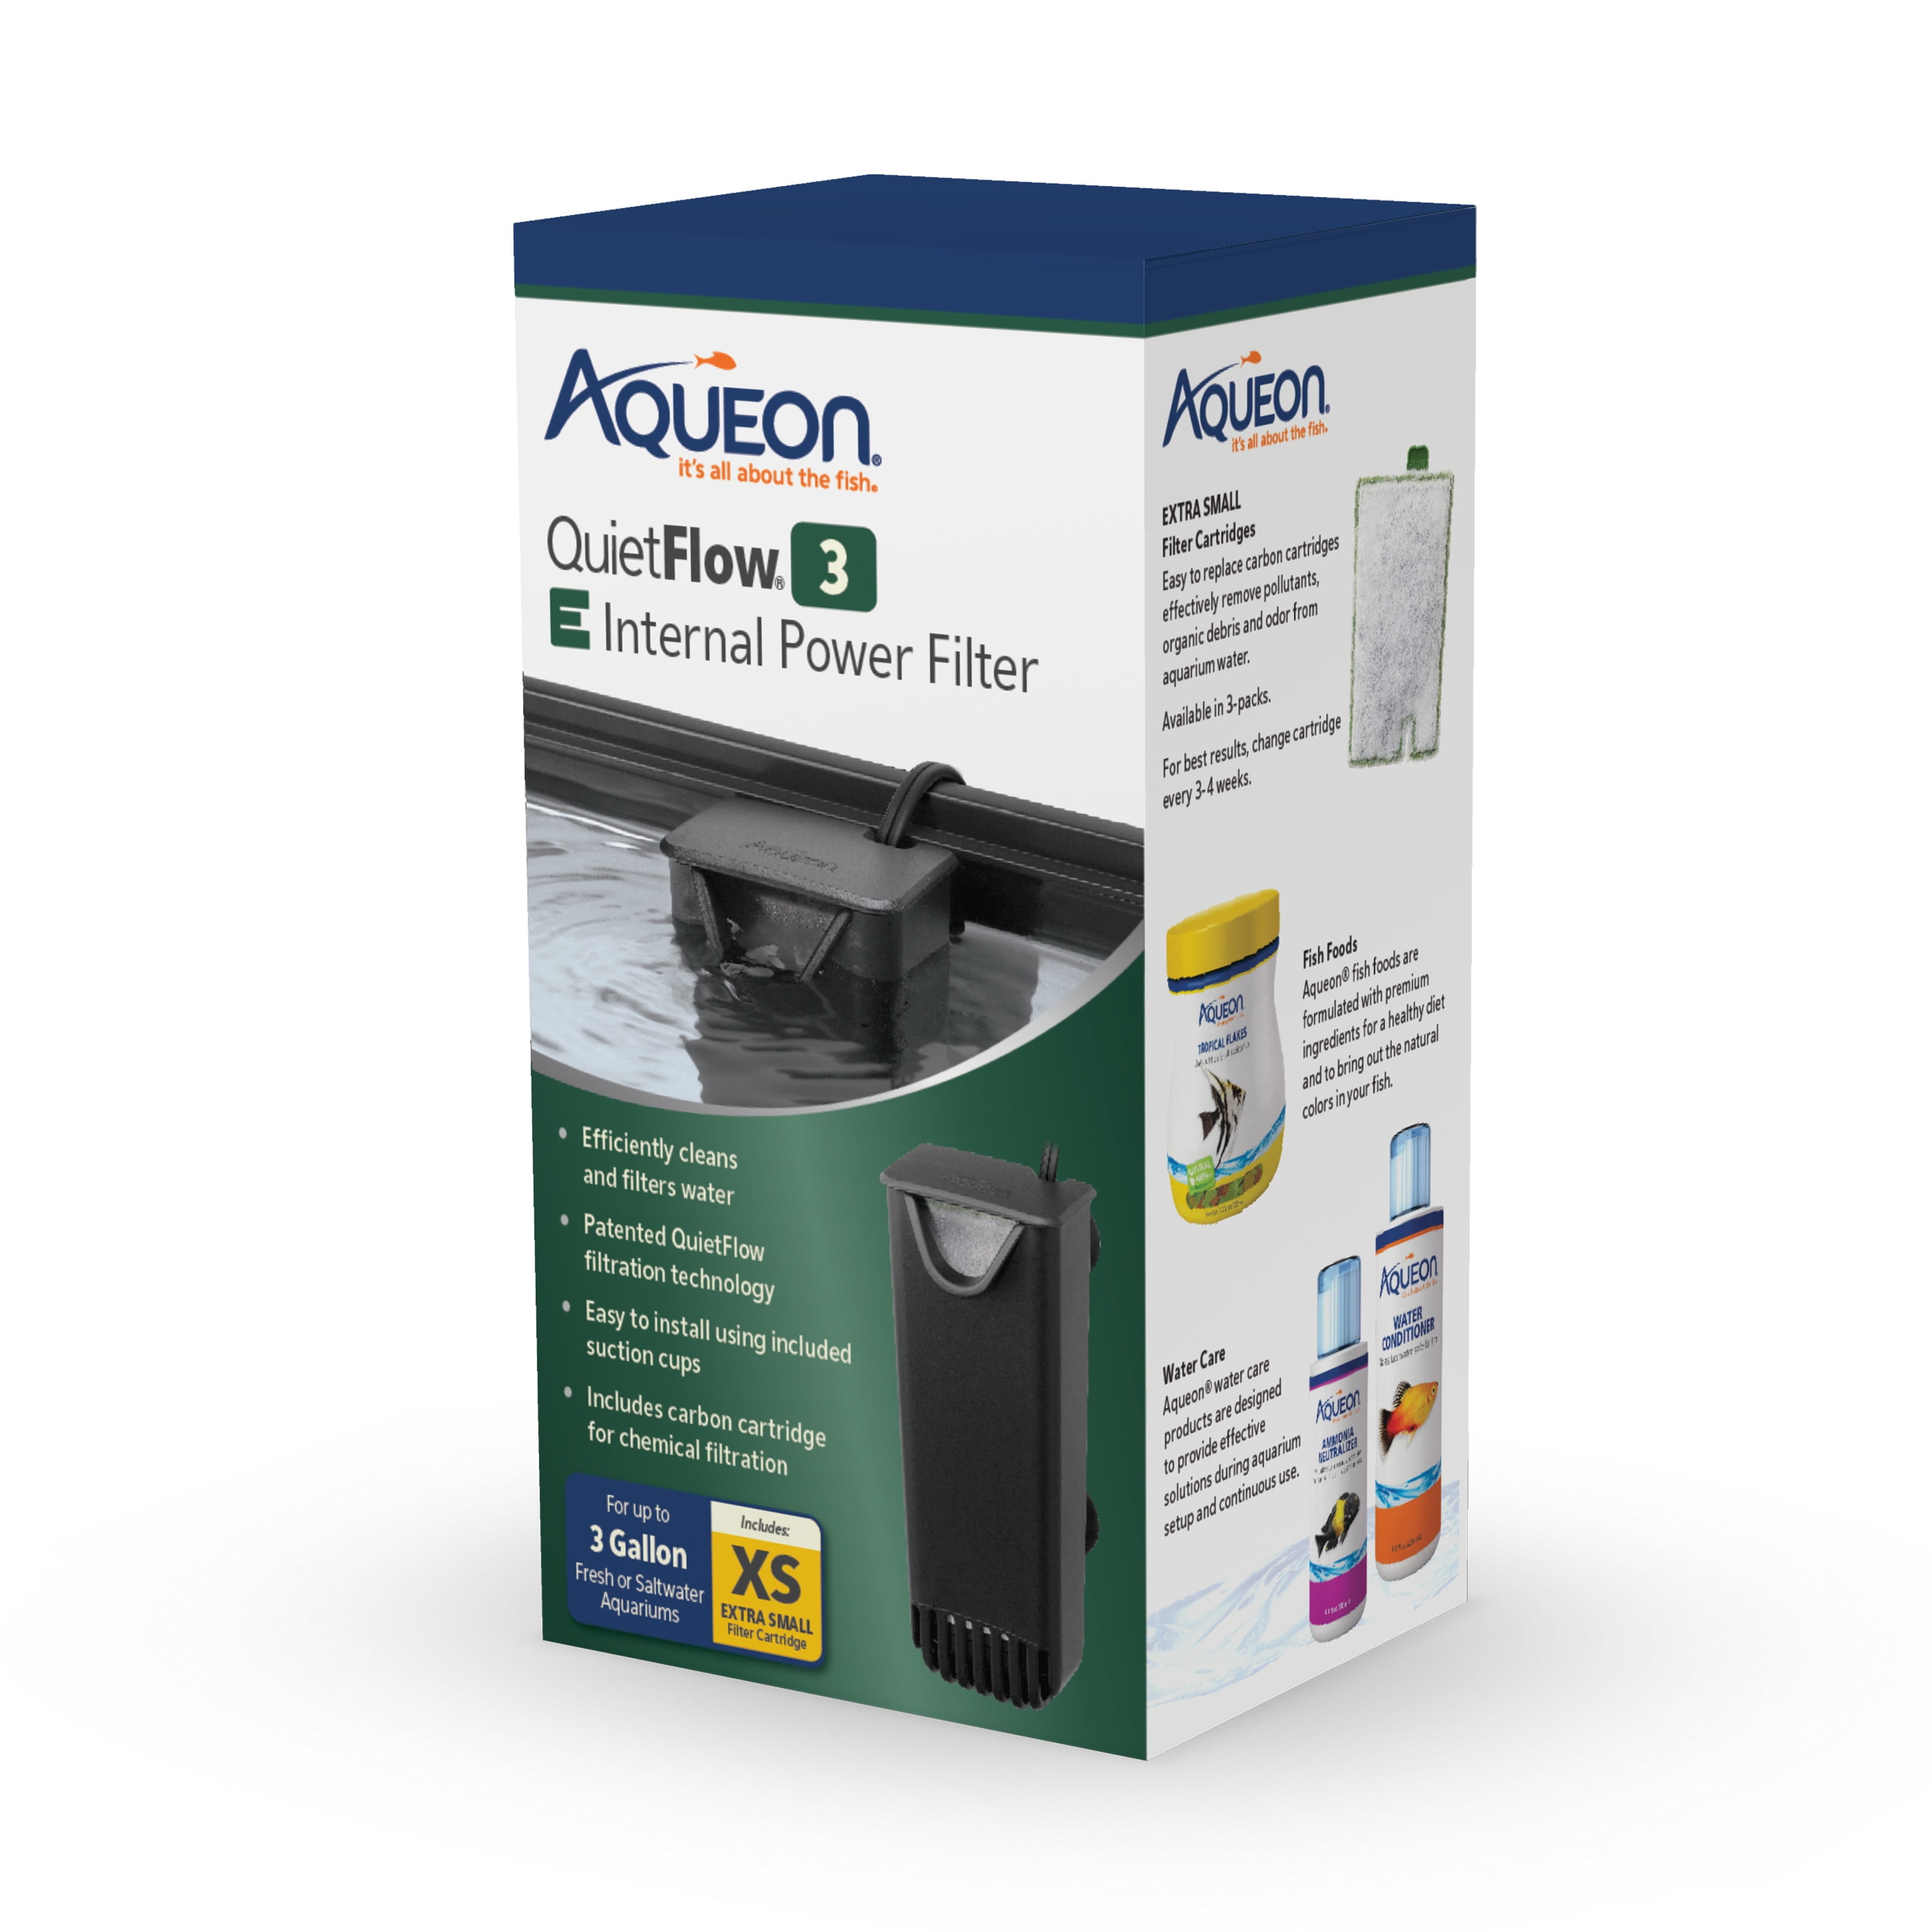 For aquariums 25816 Blacks & Grays In-Tank Filtration With Air Pump Tetra Whisper Internal Filter 3 To 10 Gallons